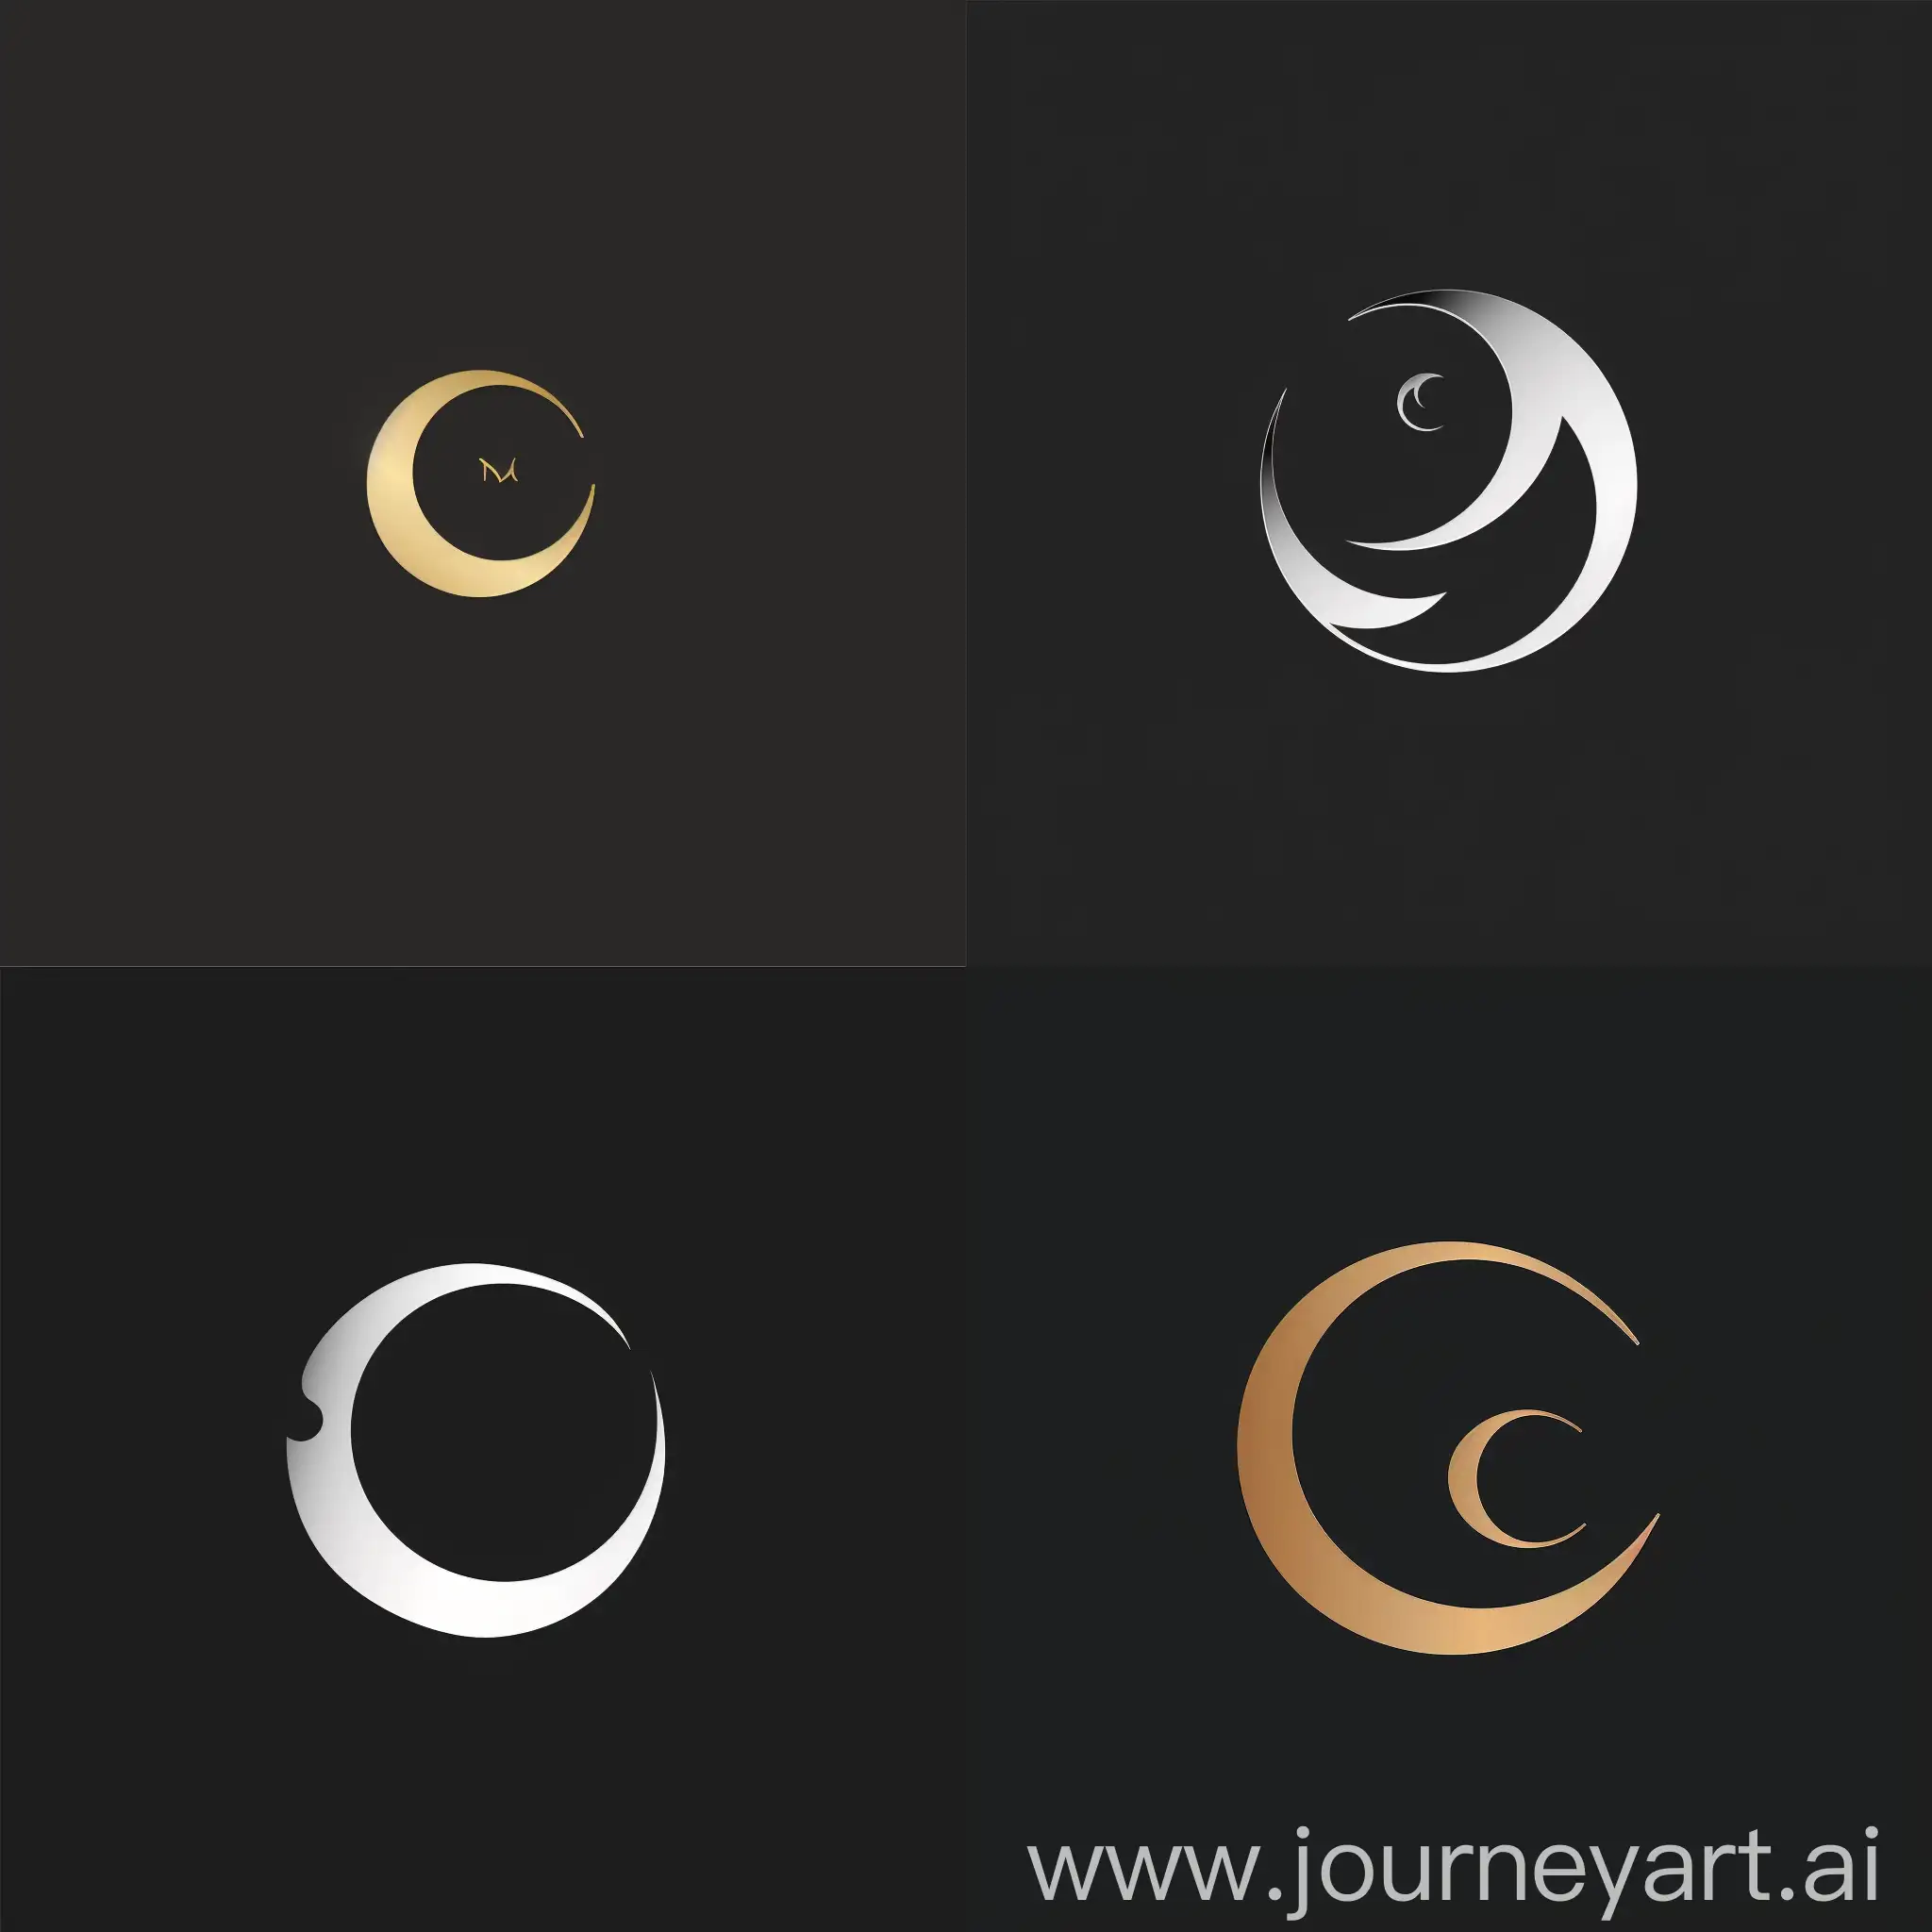 Create a company logo. For MICHAN. Clean style. Replace C with crescent